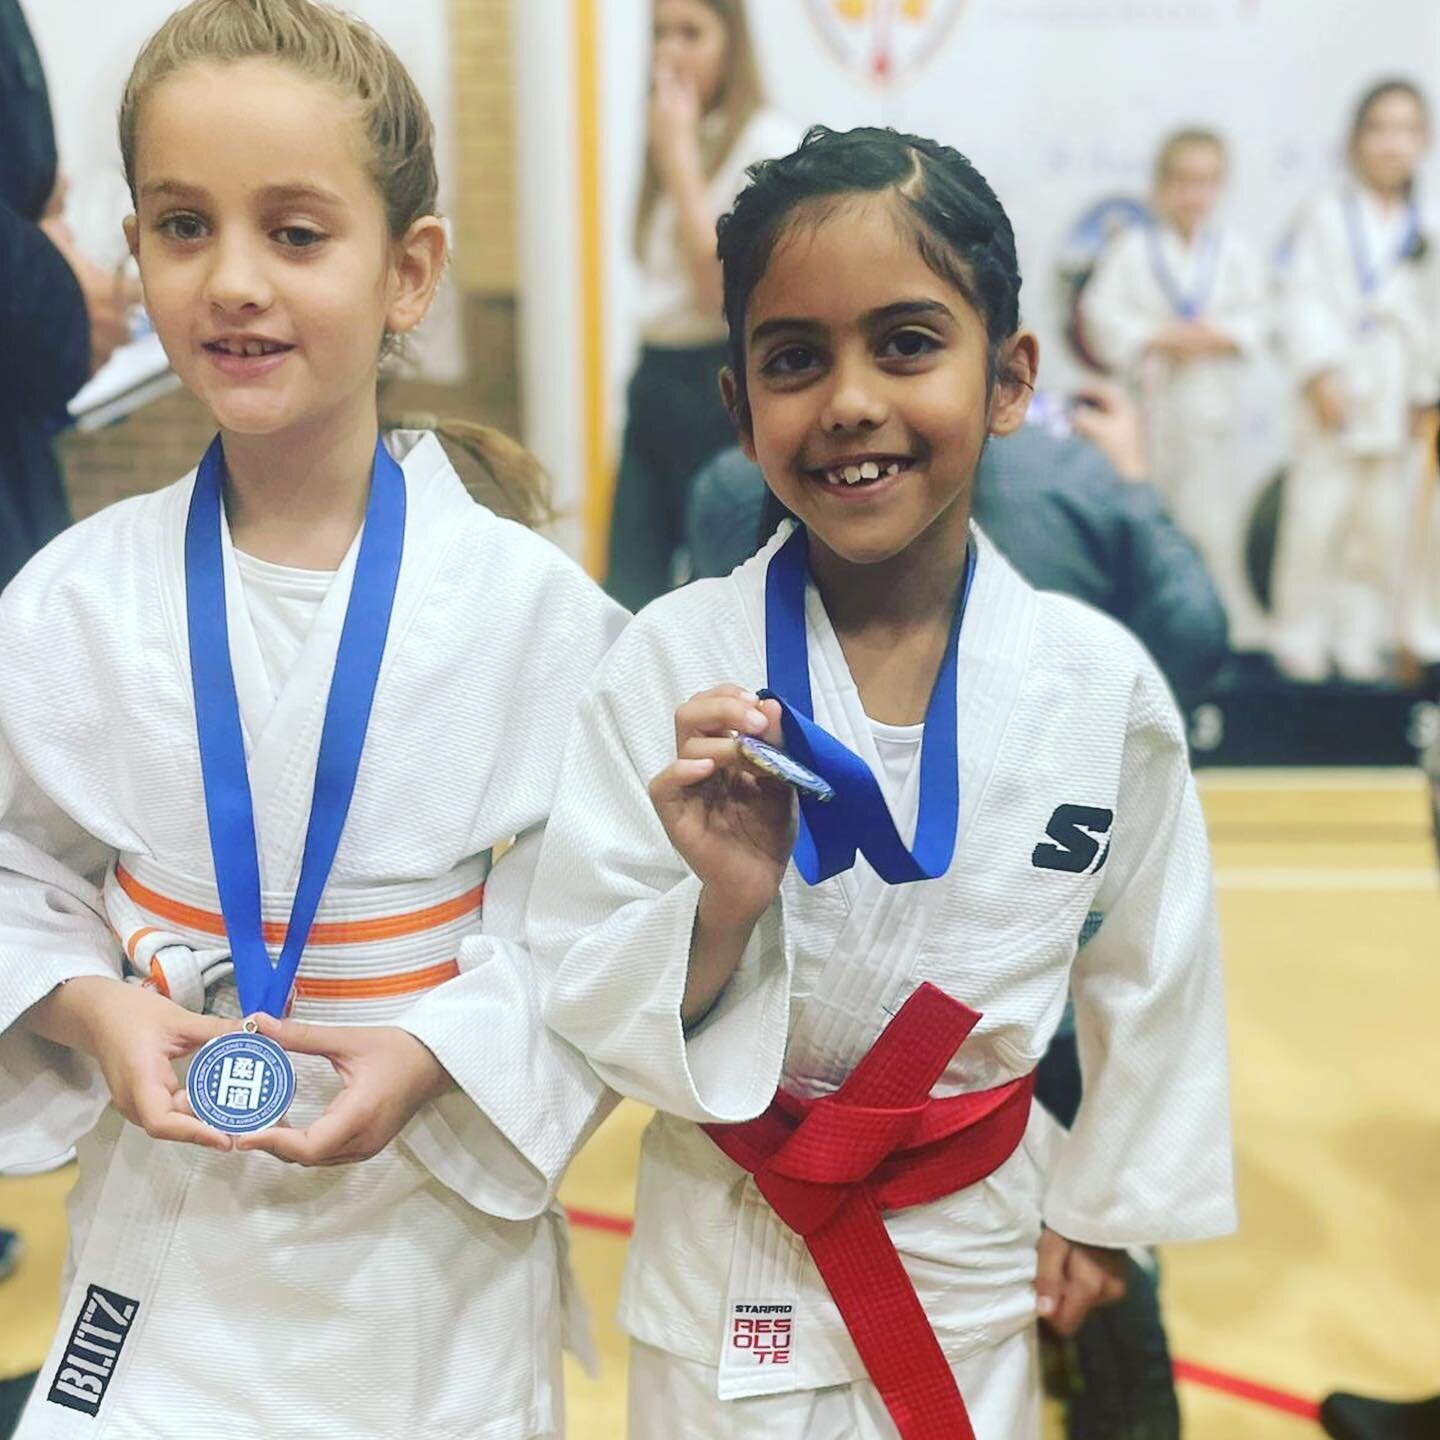 More of my favourite photos from the day! 🥋

Thank you to all our wonderful parents for all the support as always. ❤️

We have a lot to work from today but it was so nice to see the kids show so much passion for this beautiful sport! 🥹

#judofriend